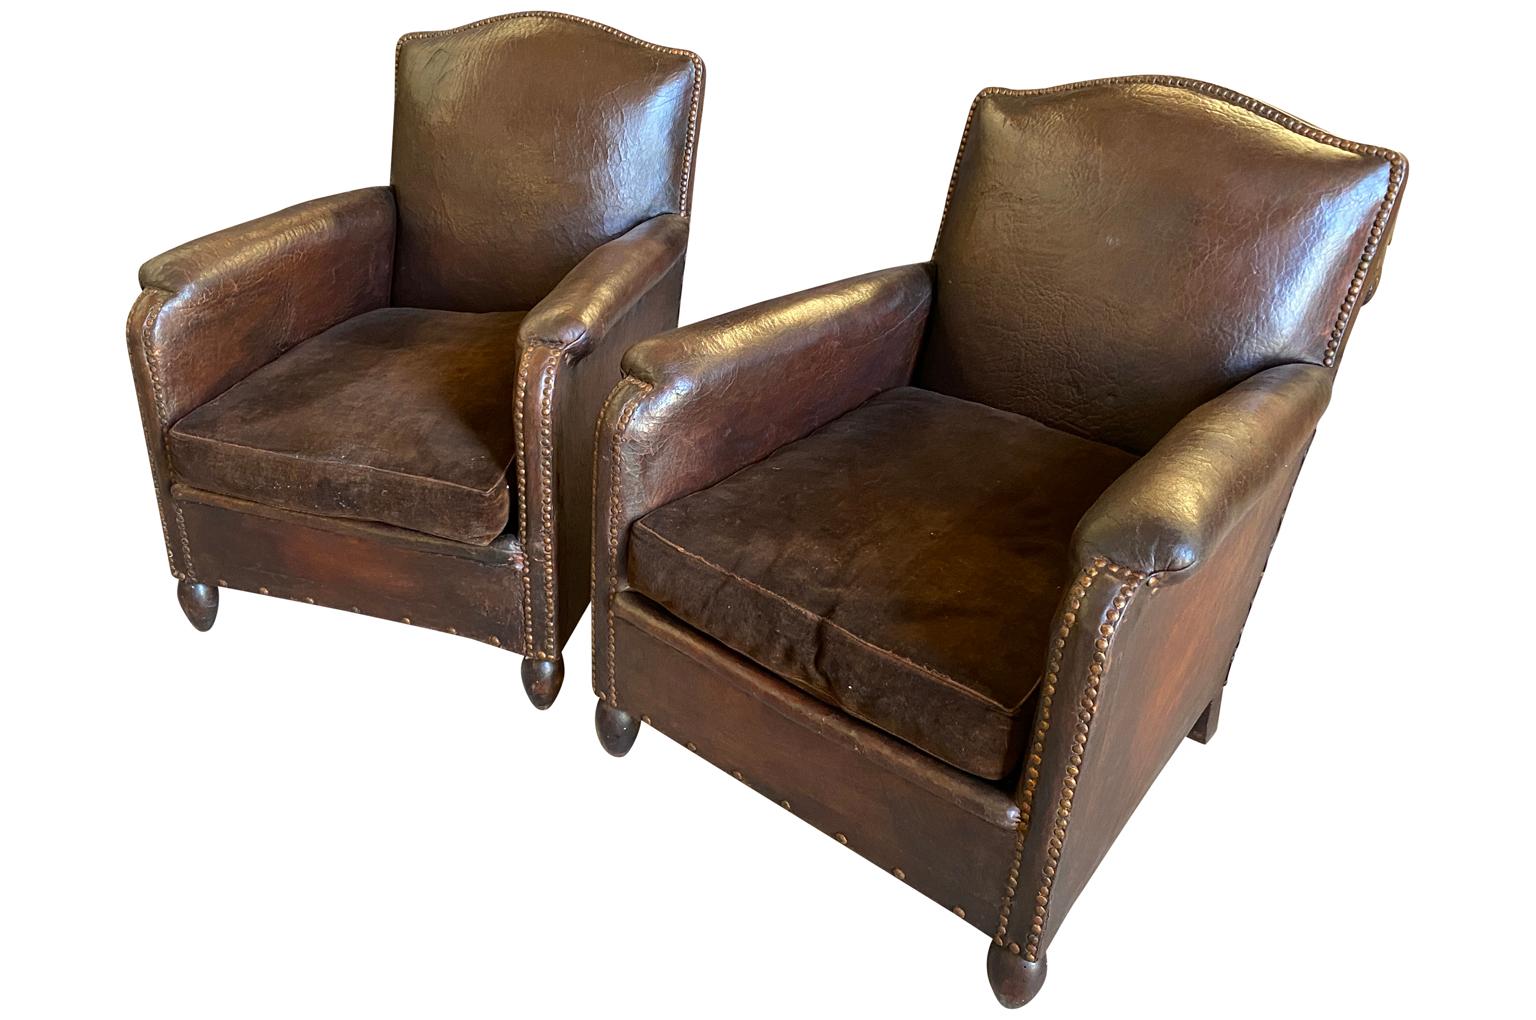 A sensational pair of classical French Arte Deco Club Chairs in beautiful leather with velvet cushions and handsome nailhead detailing.